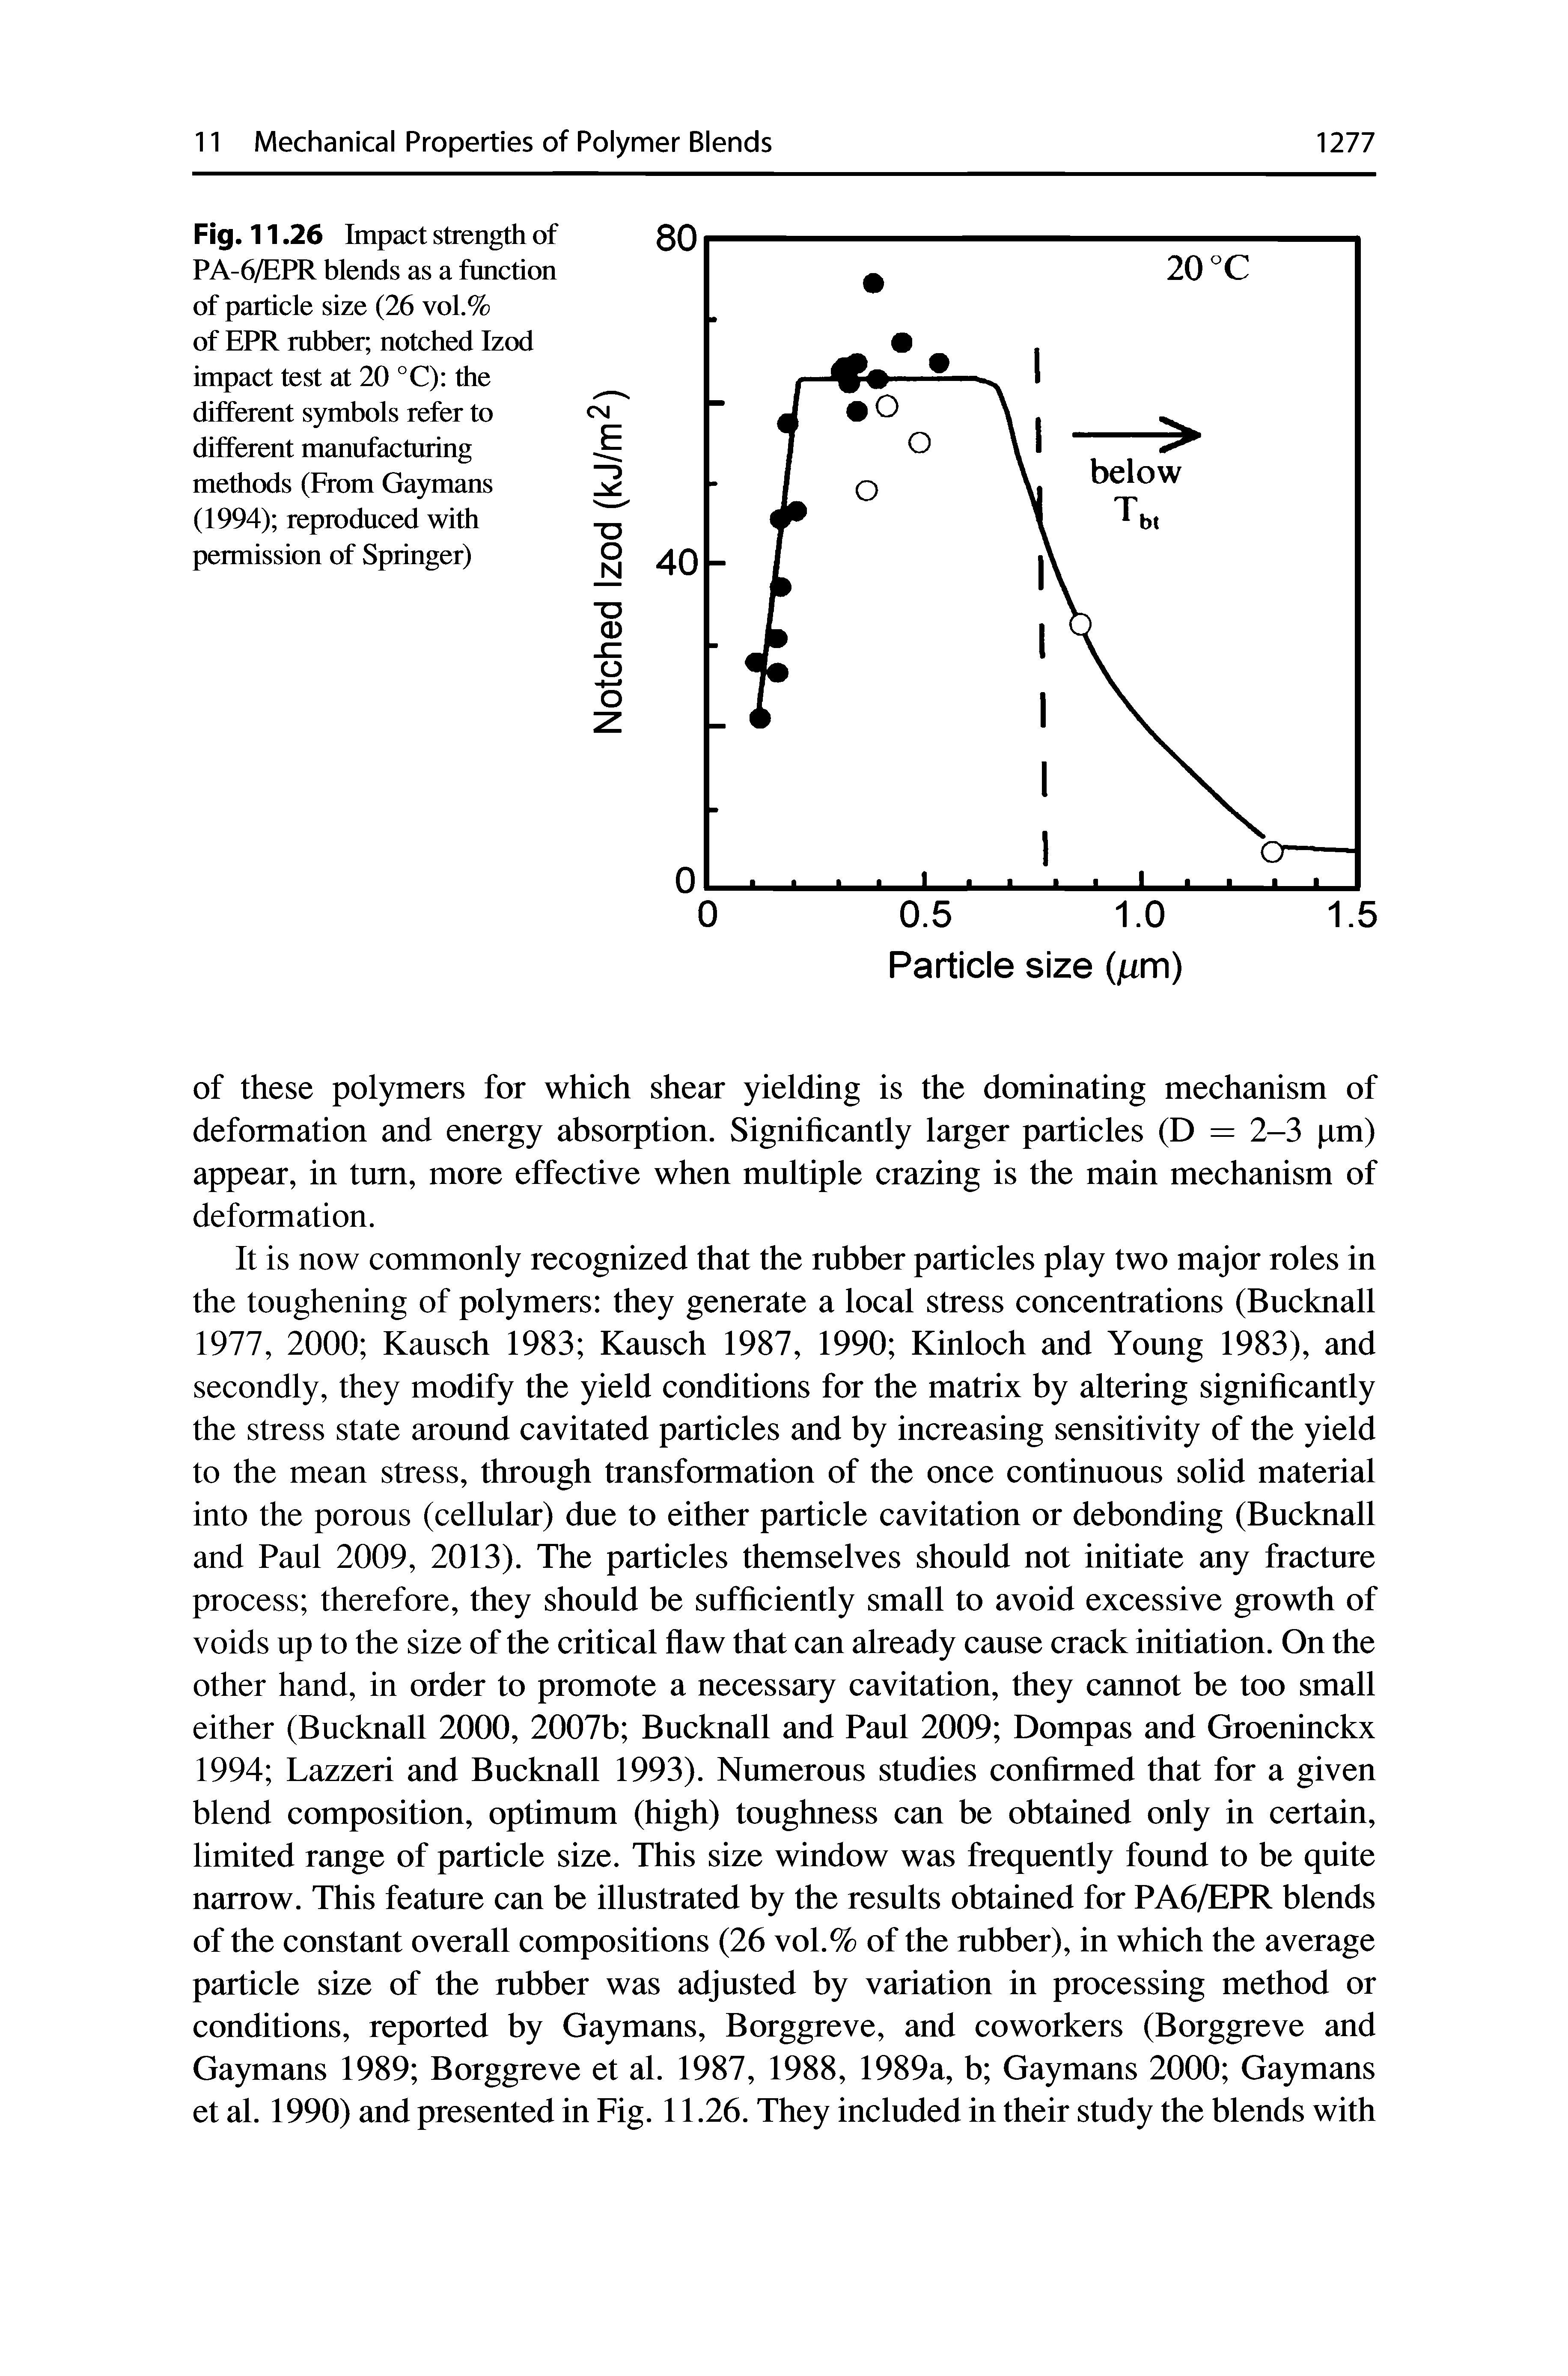 Fig. 11.26 Impact strength of PA-6/EPR blends as a function of particle size (26 vol.% of EPR rubber notched Izod impact test at 20 °C) the different symbols refer to different manufacturing methods (From Gaymans (1994) reproduced with permission of Springer)...